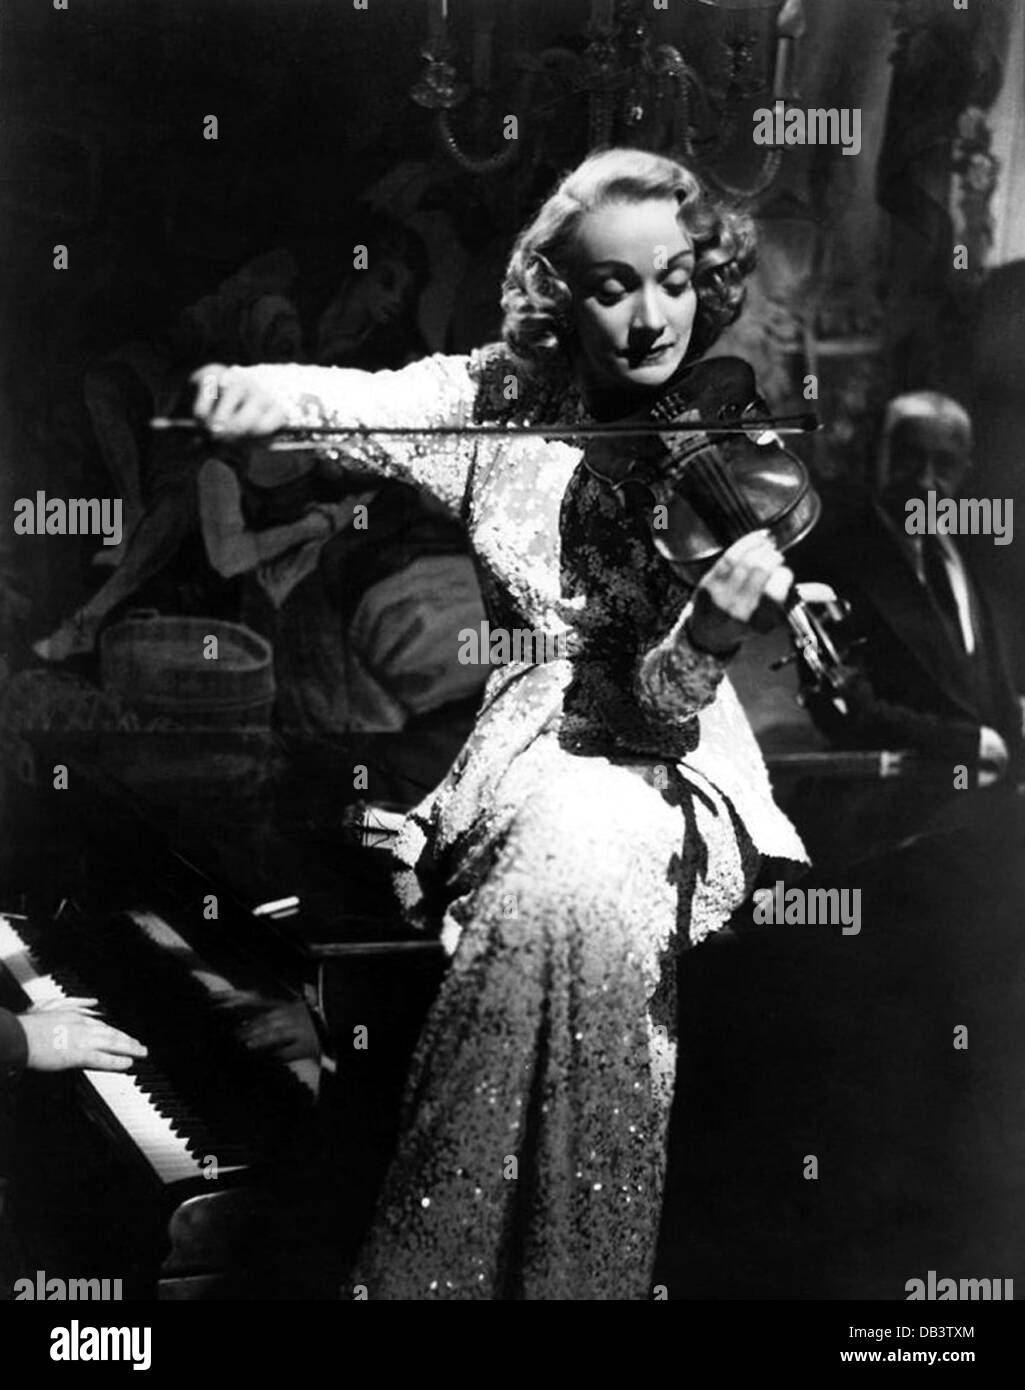 A FOREIGN AFFAIR Paramount, 1948. Directed by Billy Wilder. With Marlene Dietrich Stock Photo